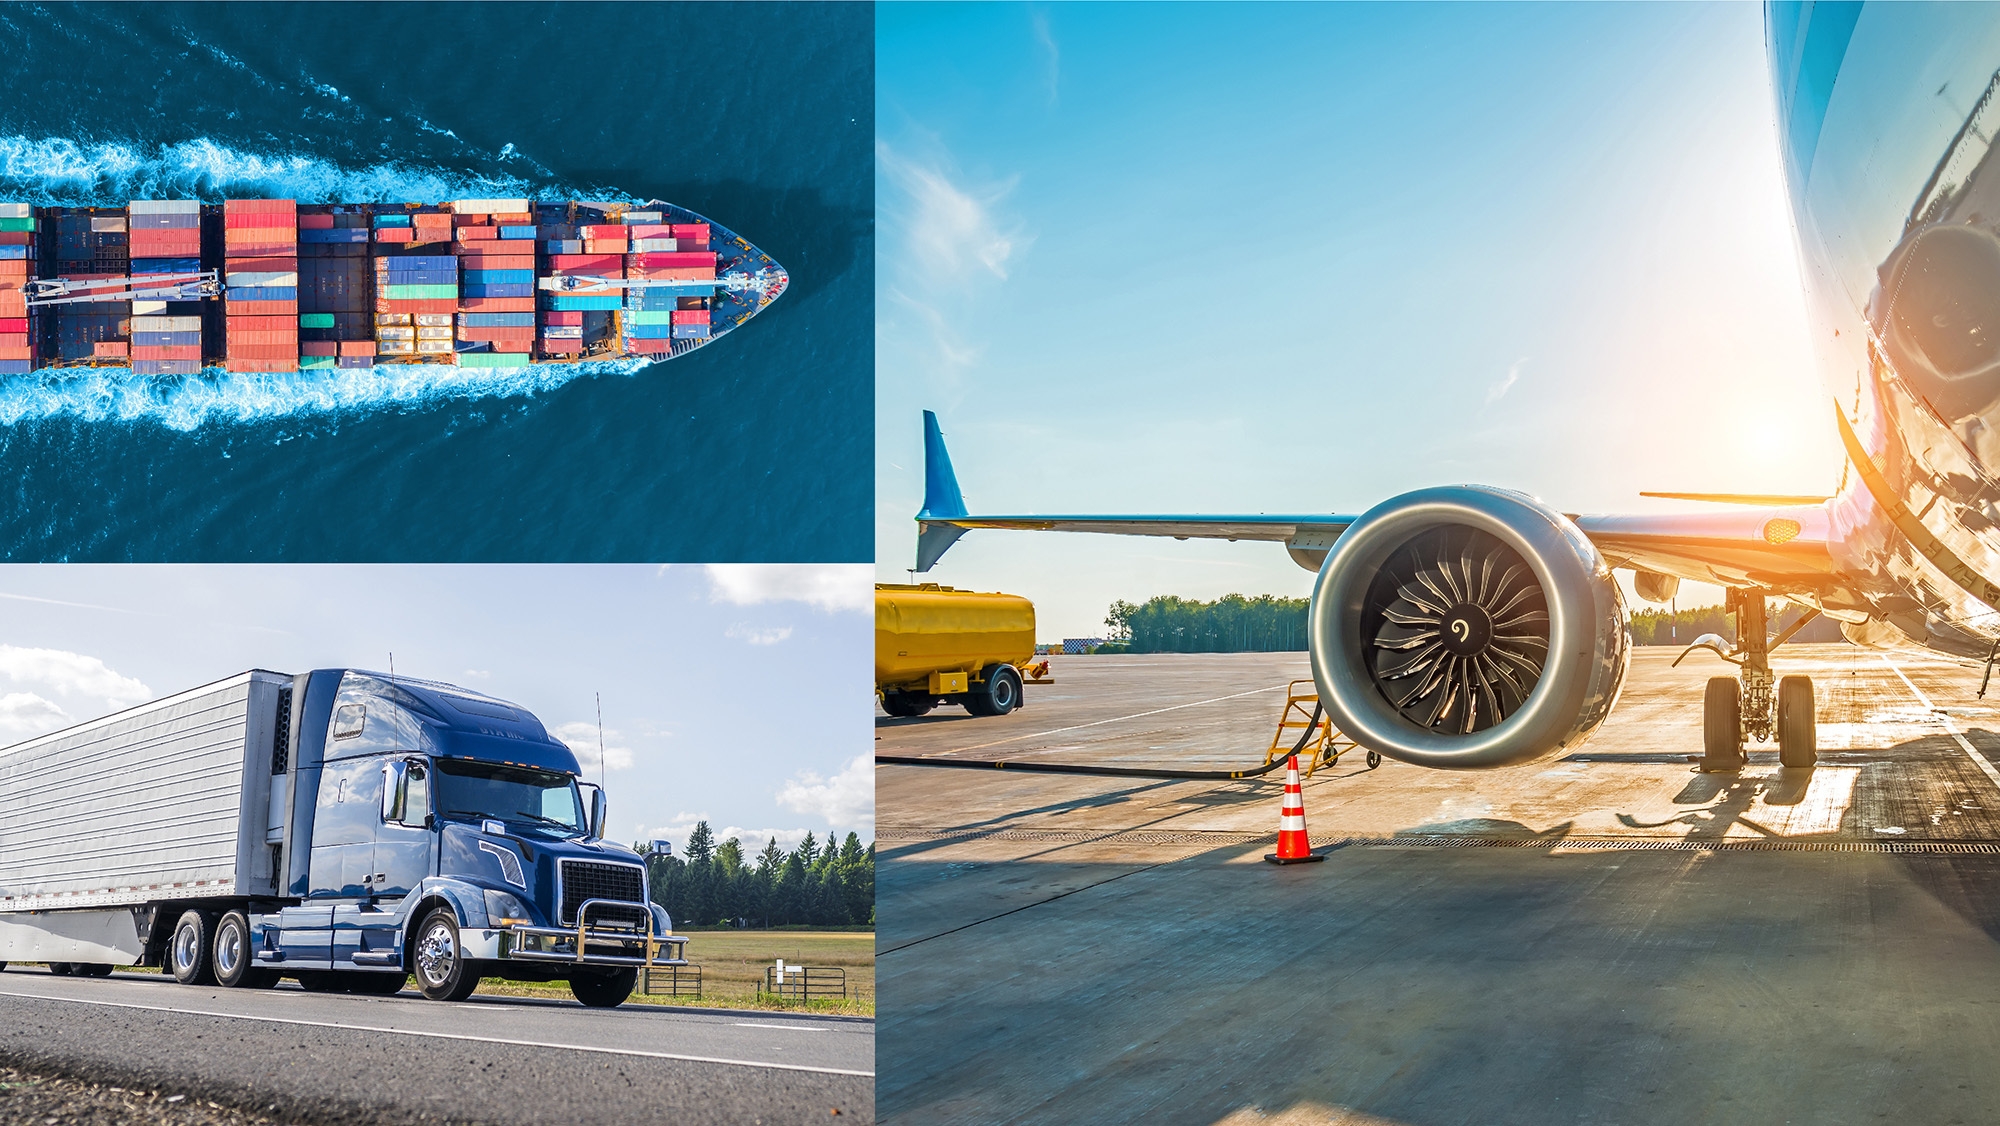 A composite image showing a freight ship, airplane and semi-truck.